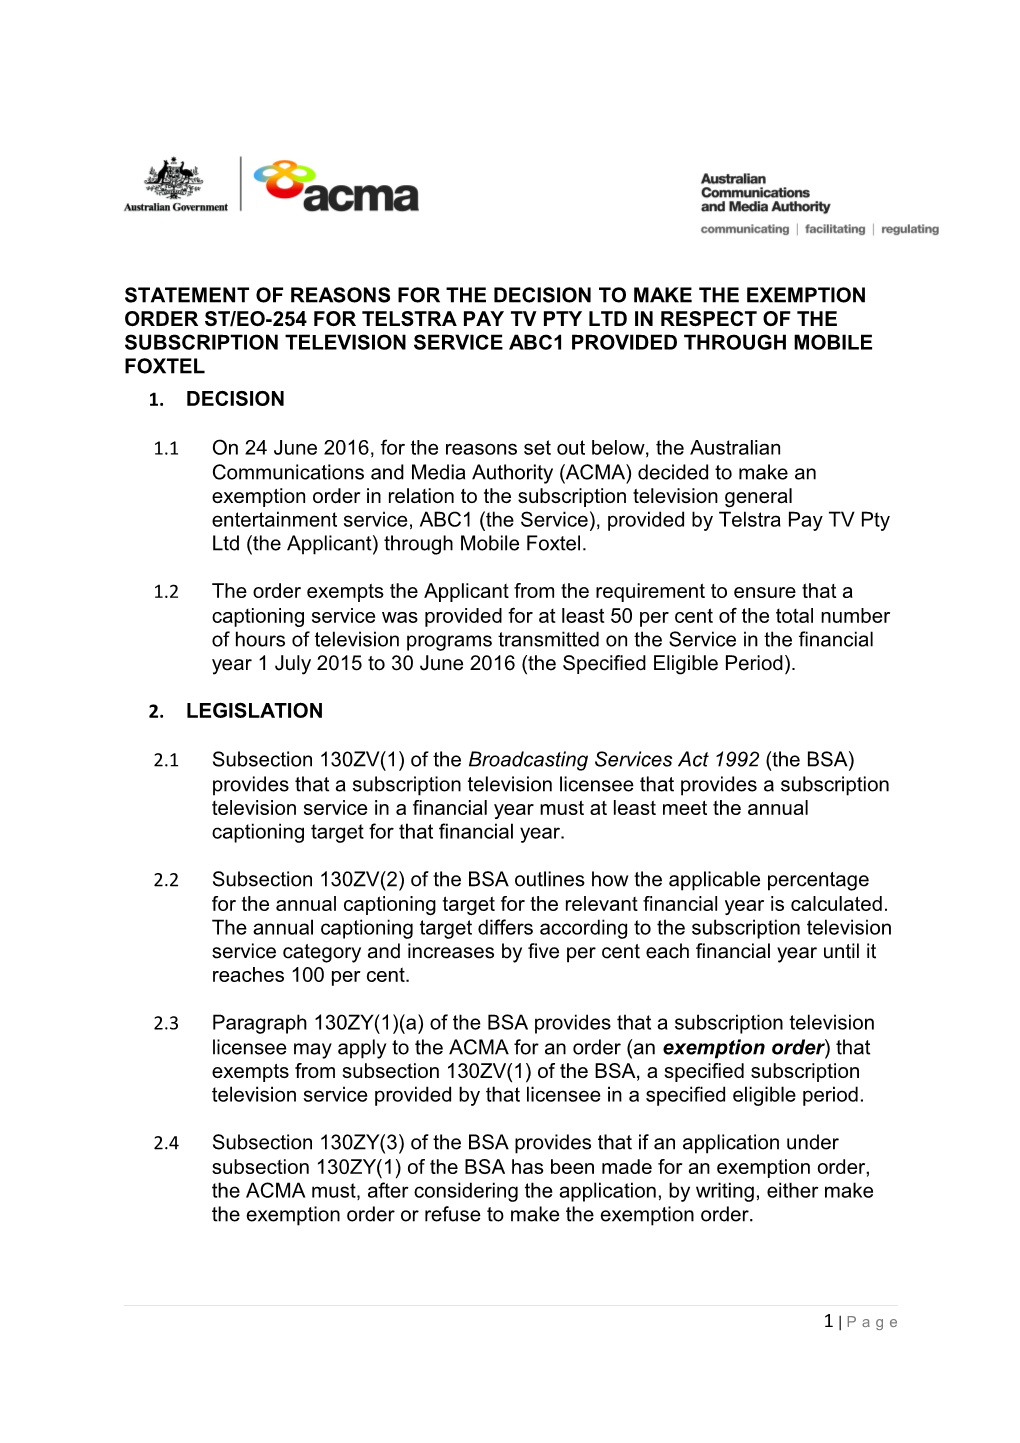 Statement of Reasons for the Decision to Make the Exemption Order St/Eo-254For Telstra